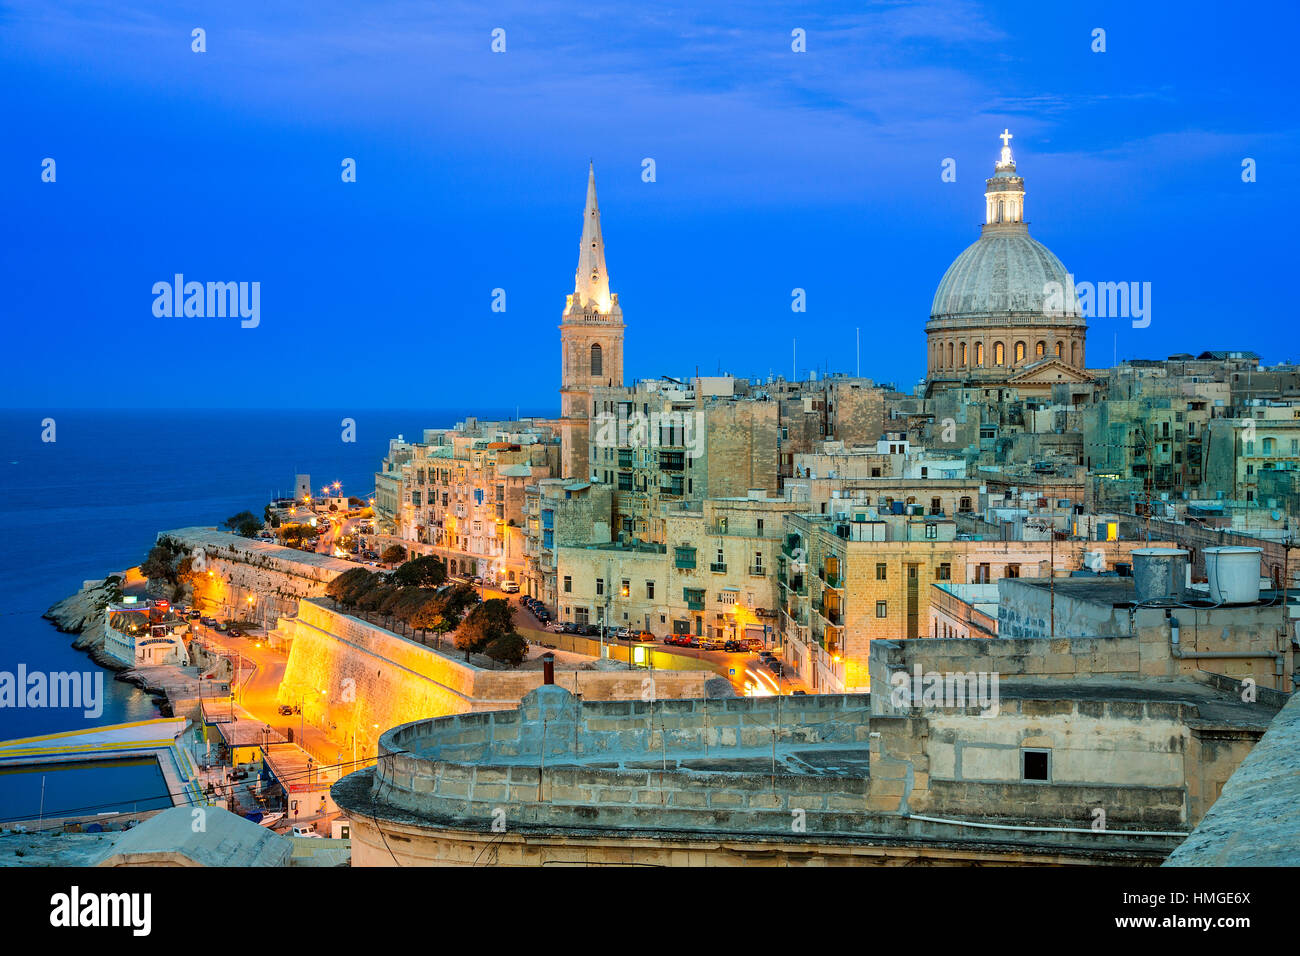 Malta, Valletta, skyline with St. Paul's Anglican Cathedral and Carmelite Church Stock Photo